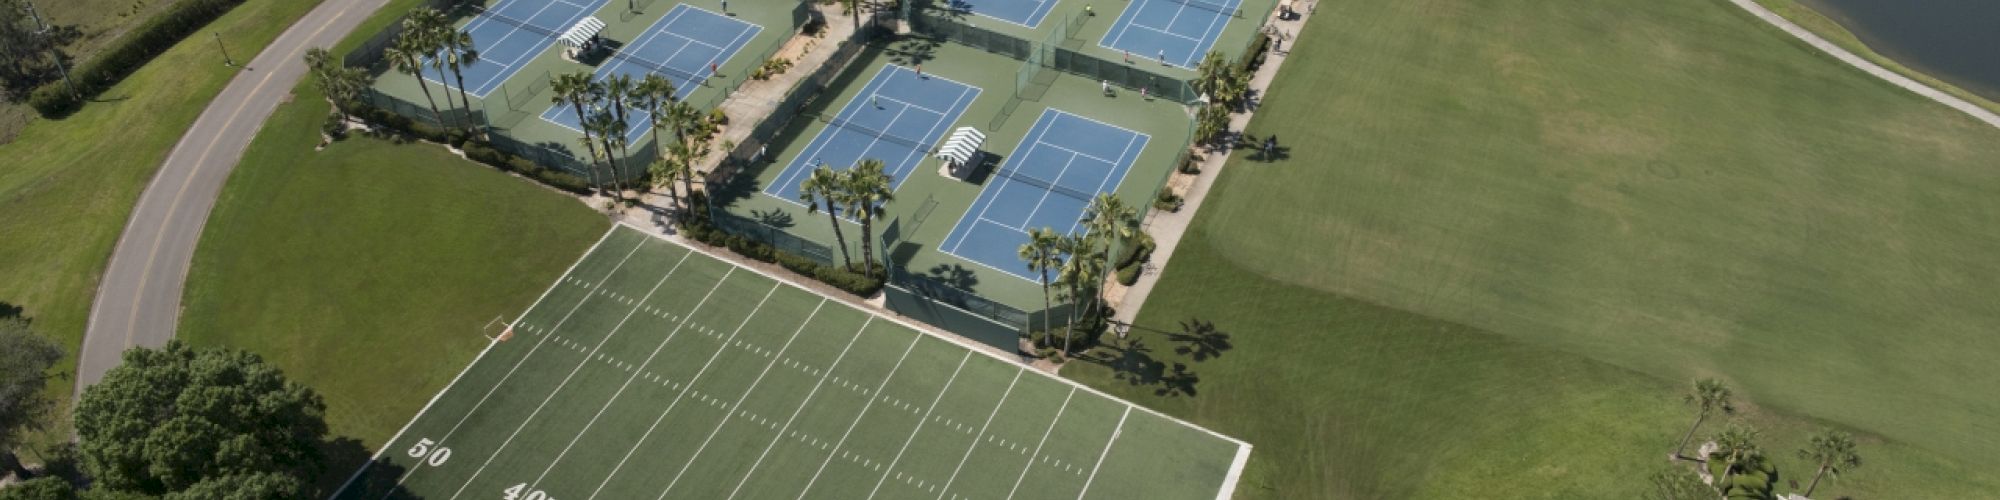 The image shows a sports complex with multiple tennis courts, a small football field, surrounding greenery, and a nearby body of water.